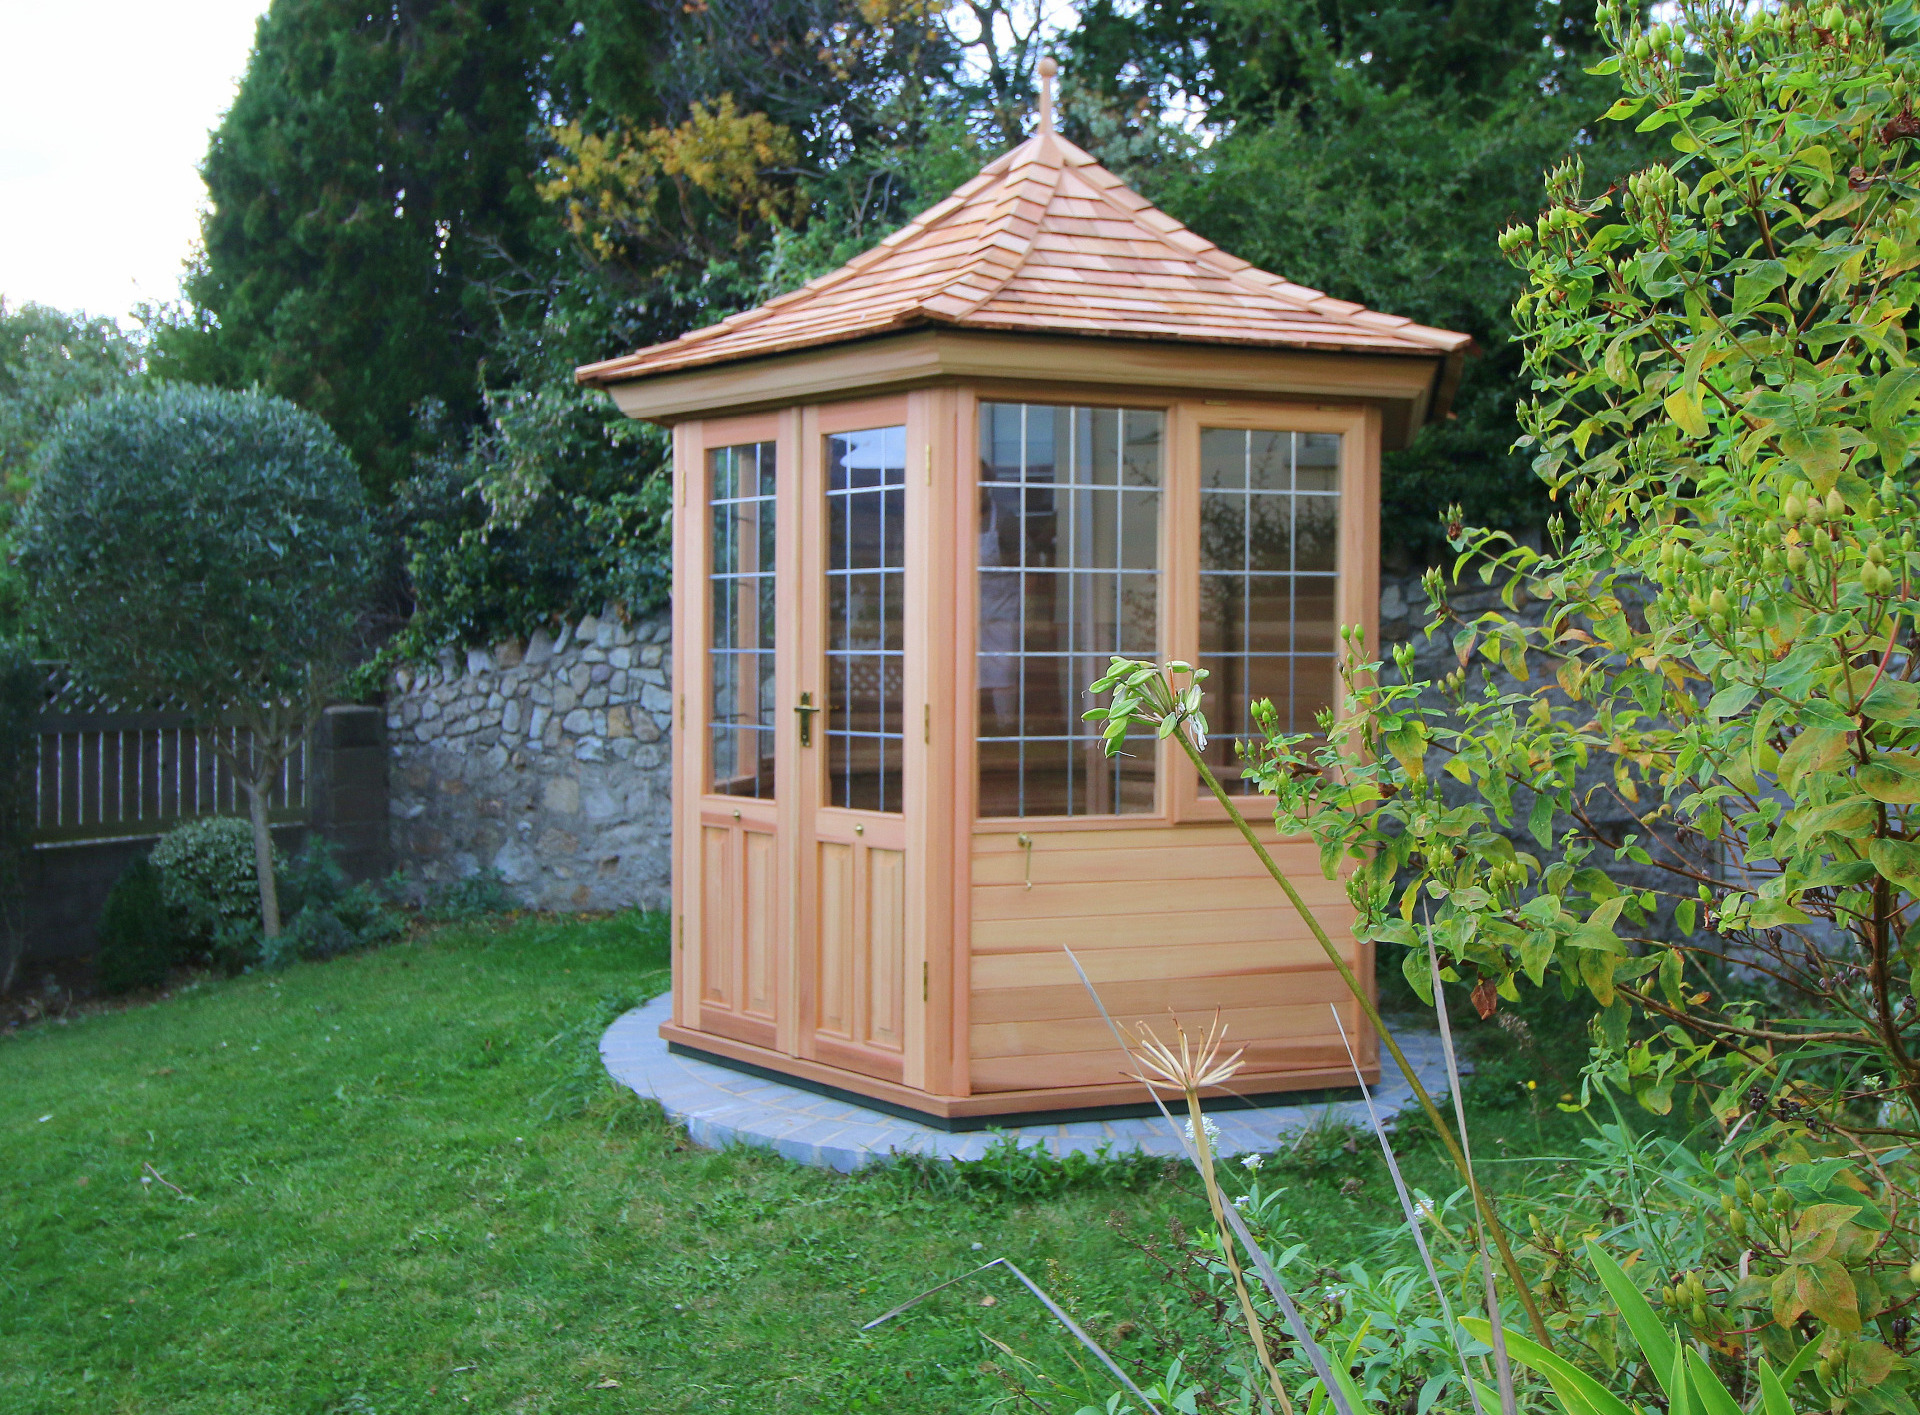 The 8ft/2.4m Hexagonal Victorian Garden Summerhouse, exceptionally well made in Western Red Cedar, supplied + fitted in Killiney, Co Dublin